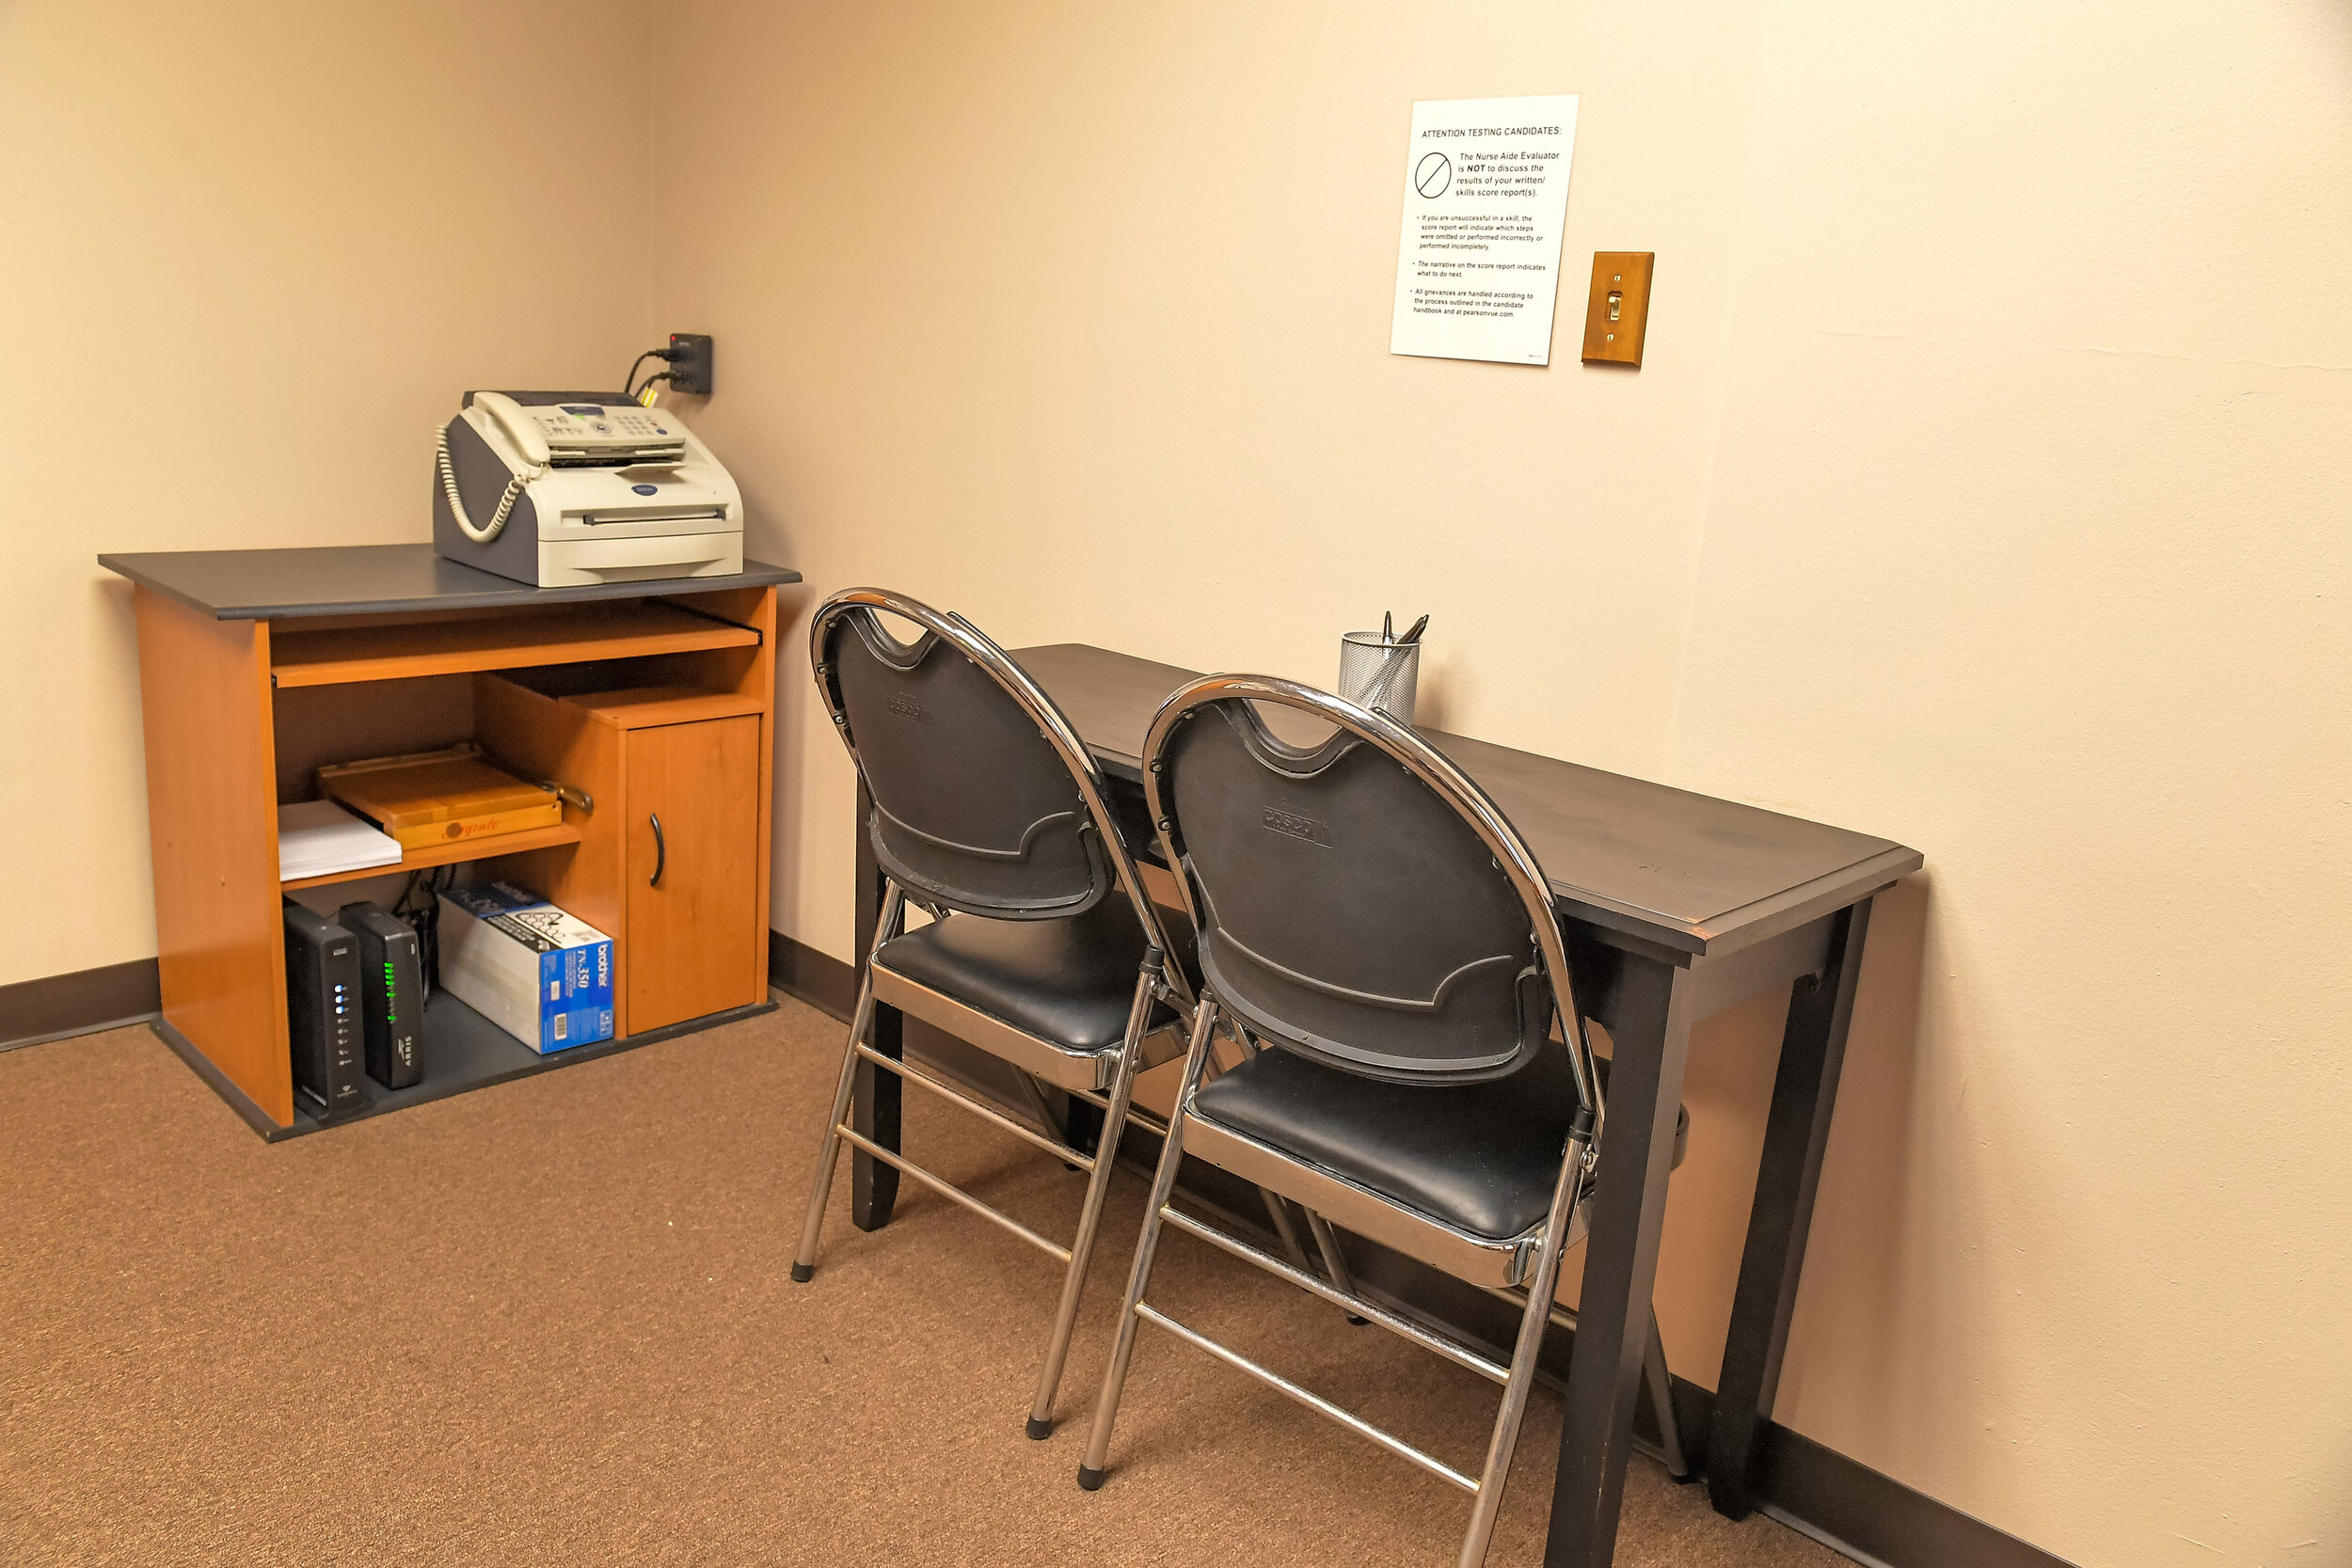   Fax machine and exit survey area  